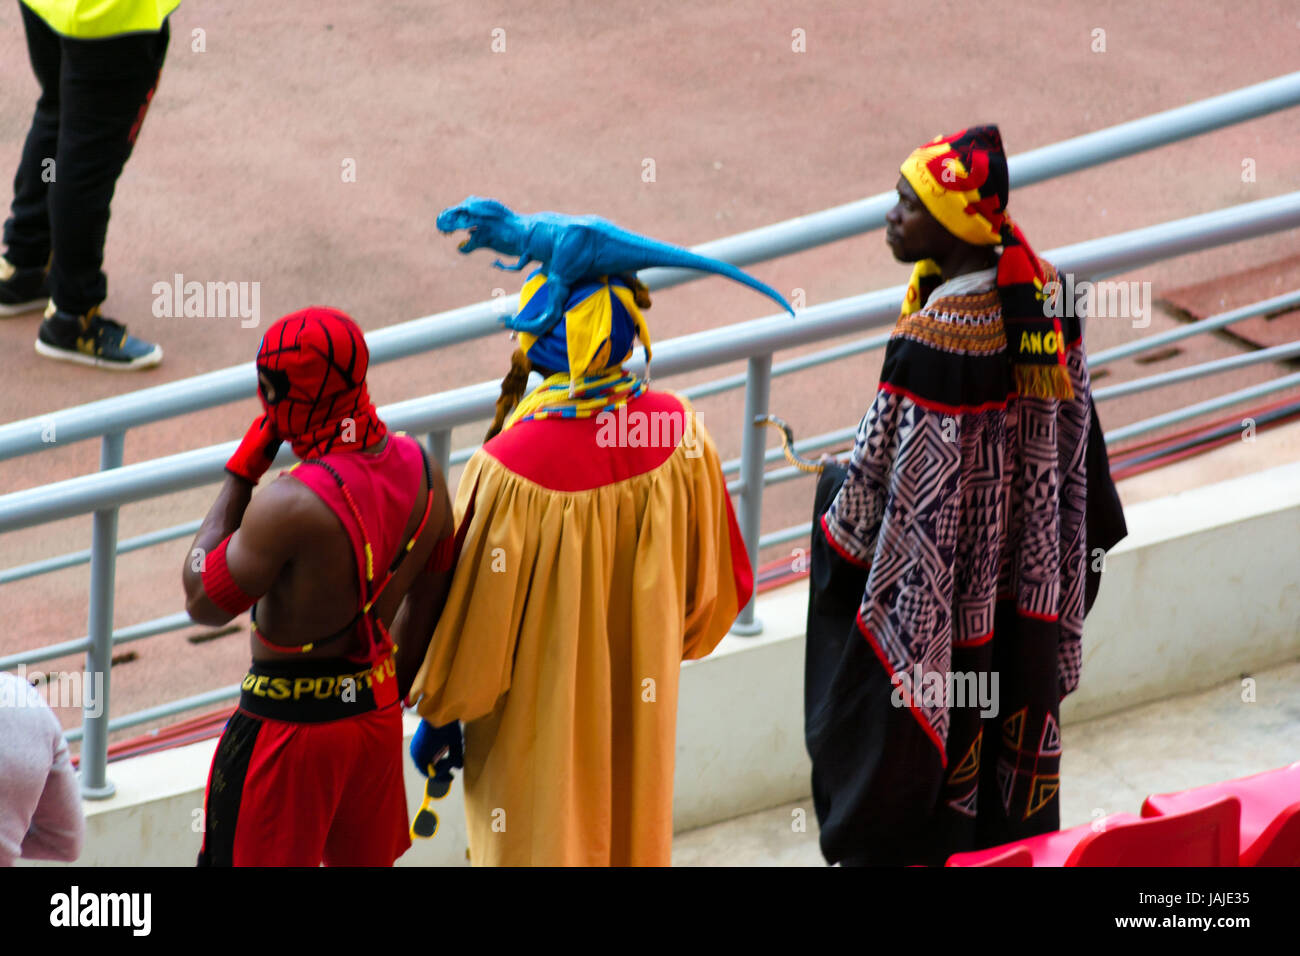 LUANDA, ANGOLA - JULY 04, 2015: Angolan fans look on as Angola takes on South Africa in the group stage of the 2015 African Nations Championship in Lu Stock Photo